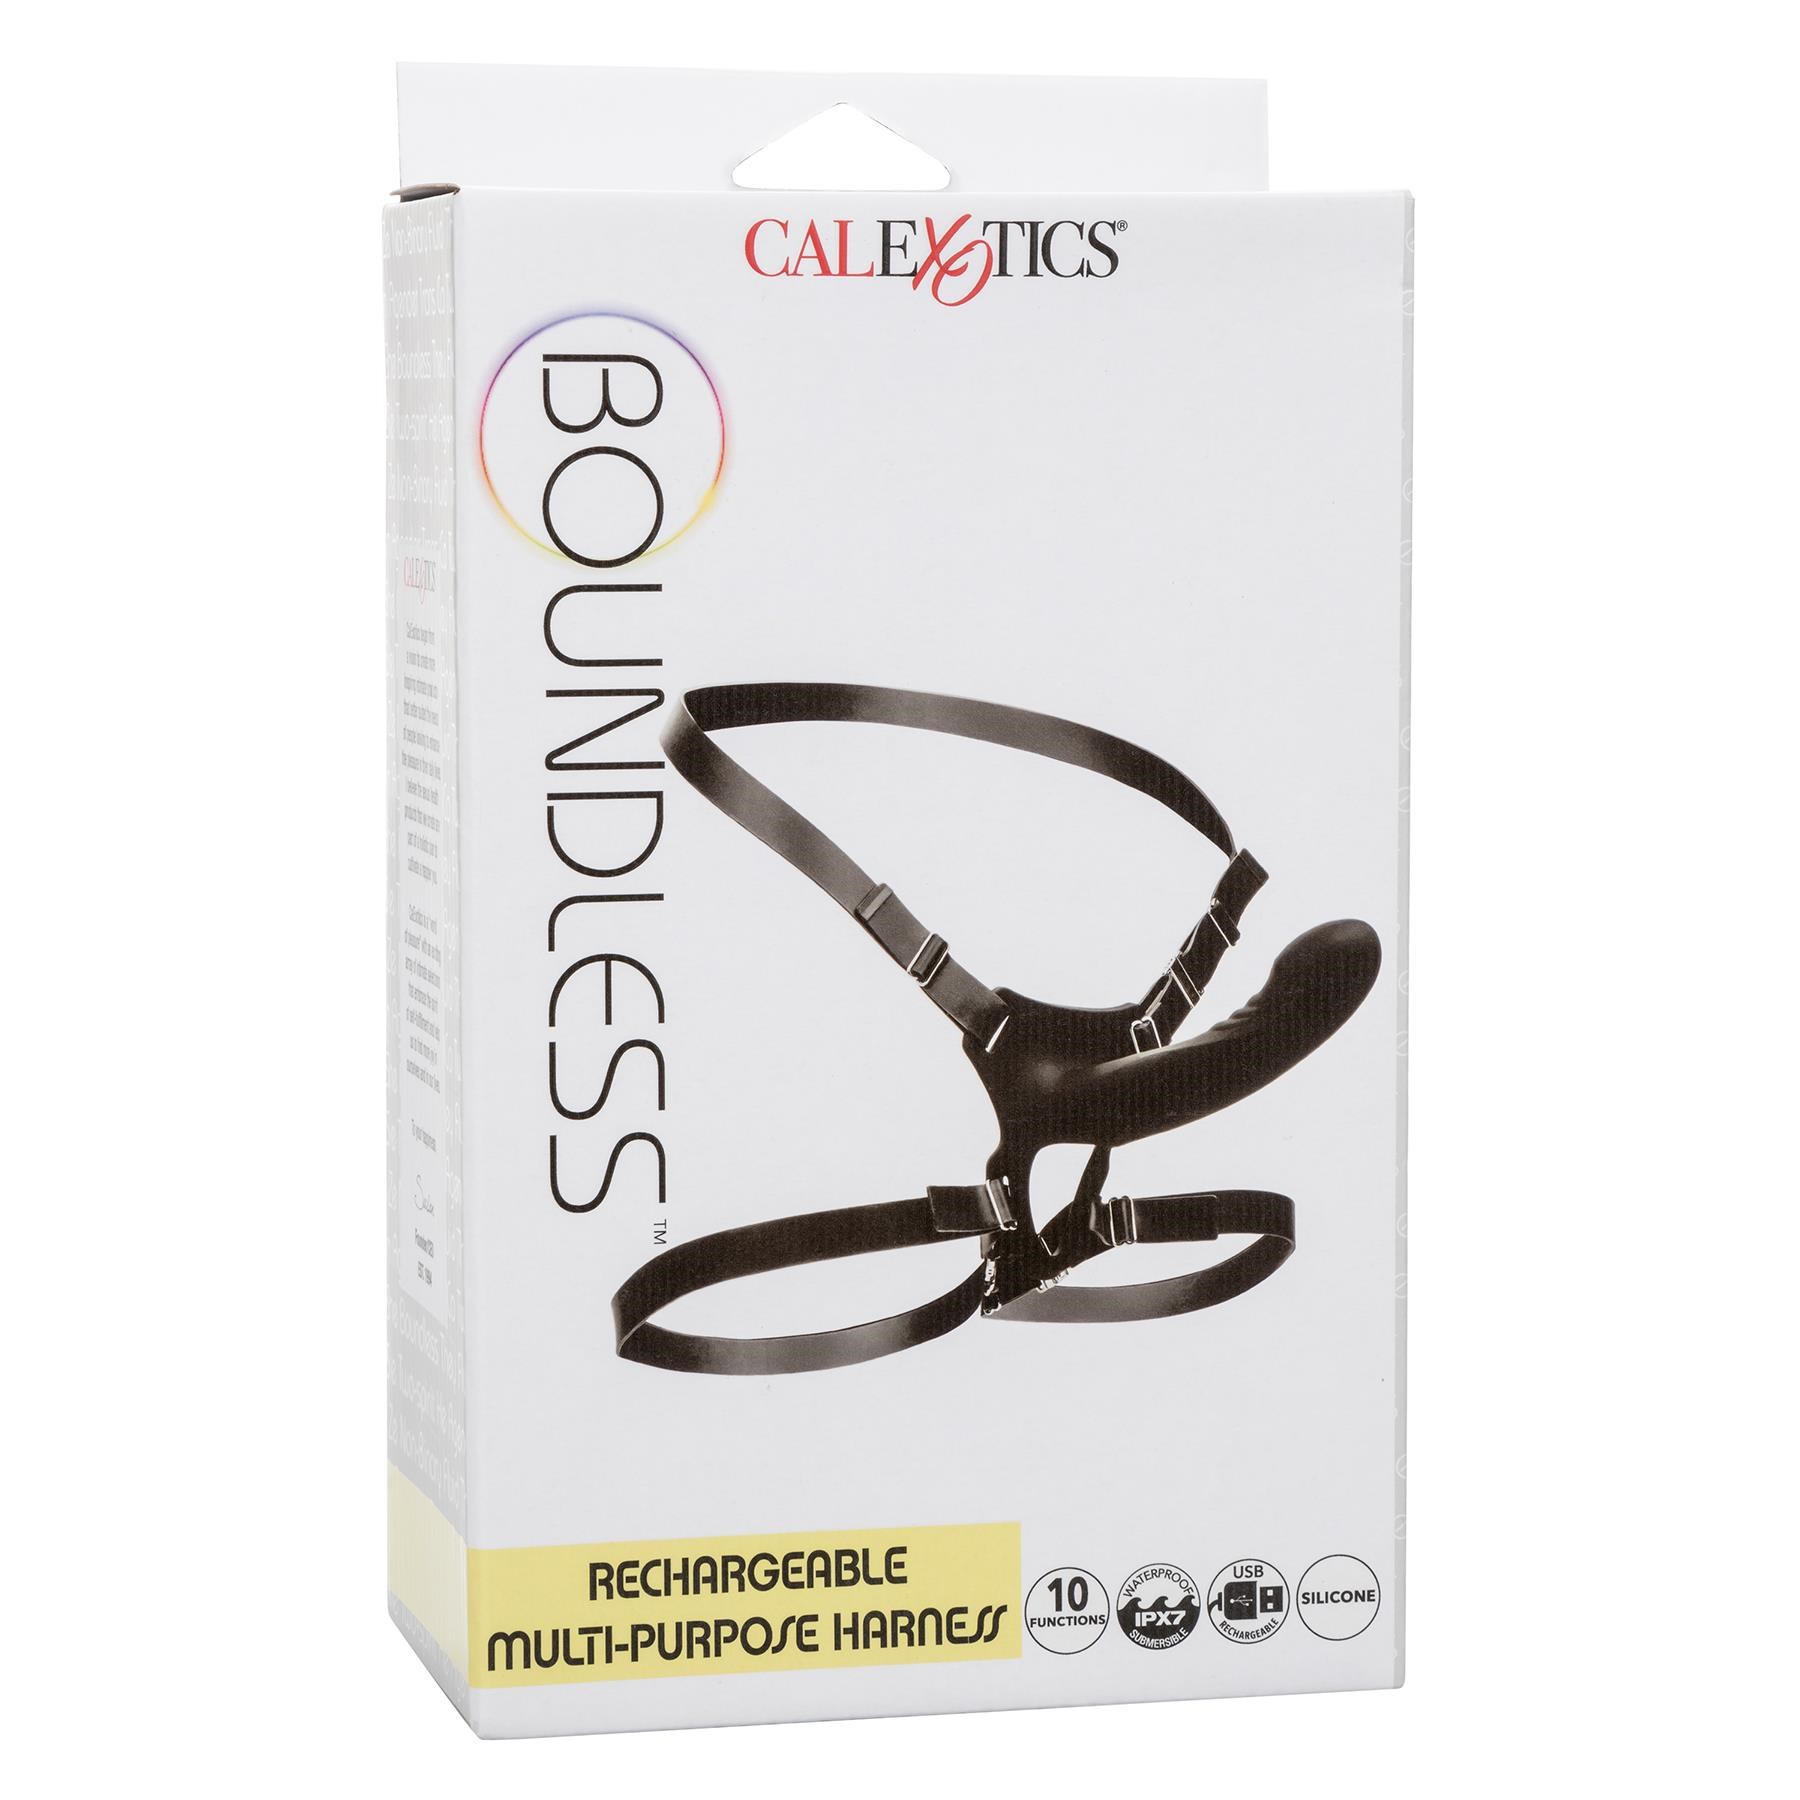 Boundless Rechargeable Multi-Purpose Harness - Packaging